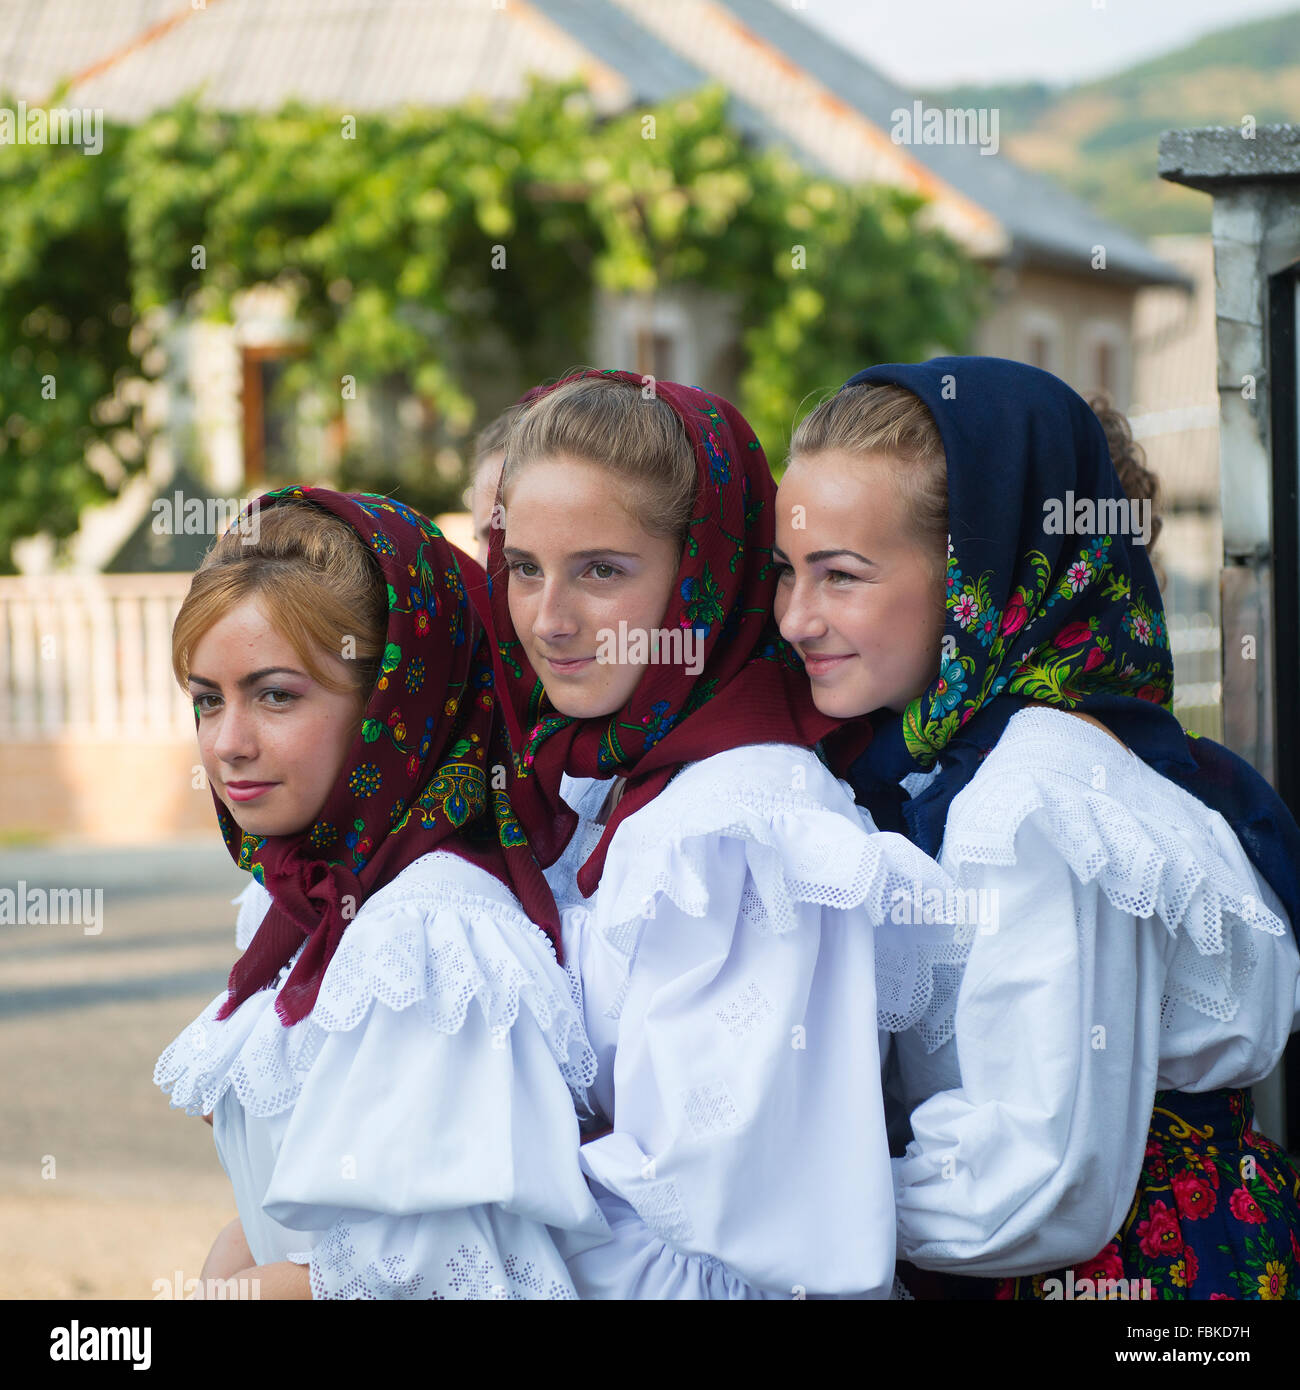 List 97+ Pictures Pictures Of Romanian People Completed